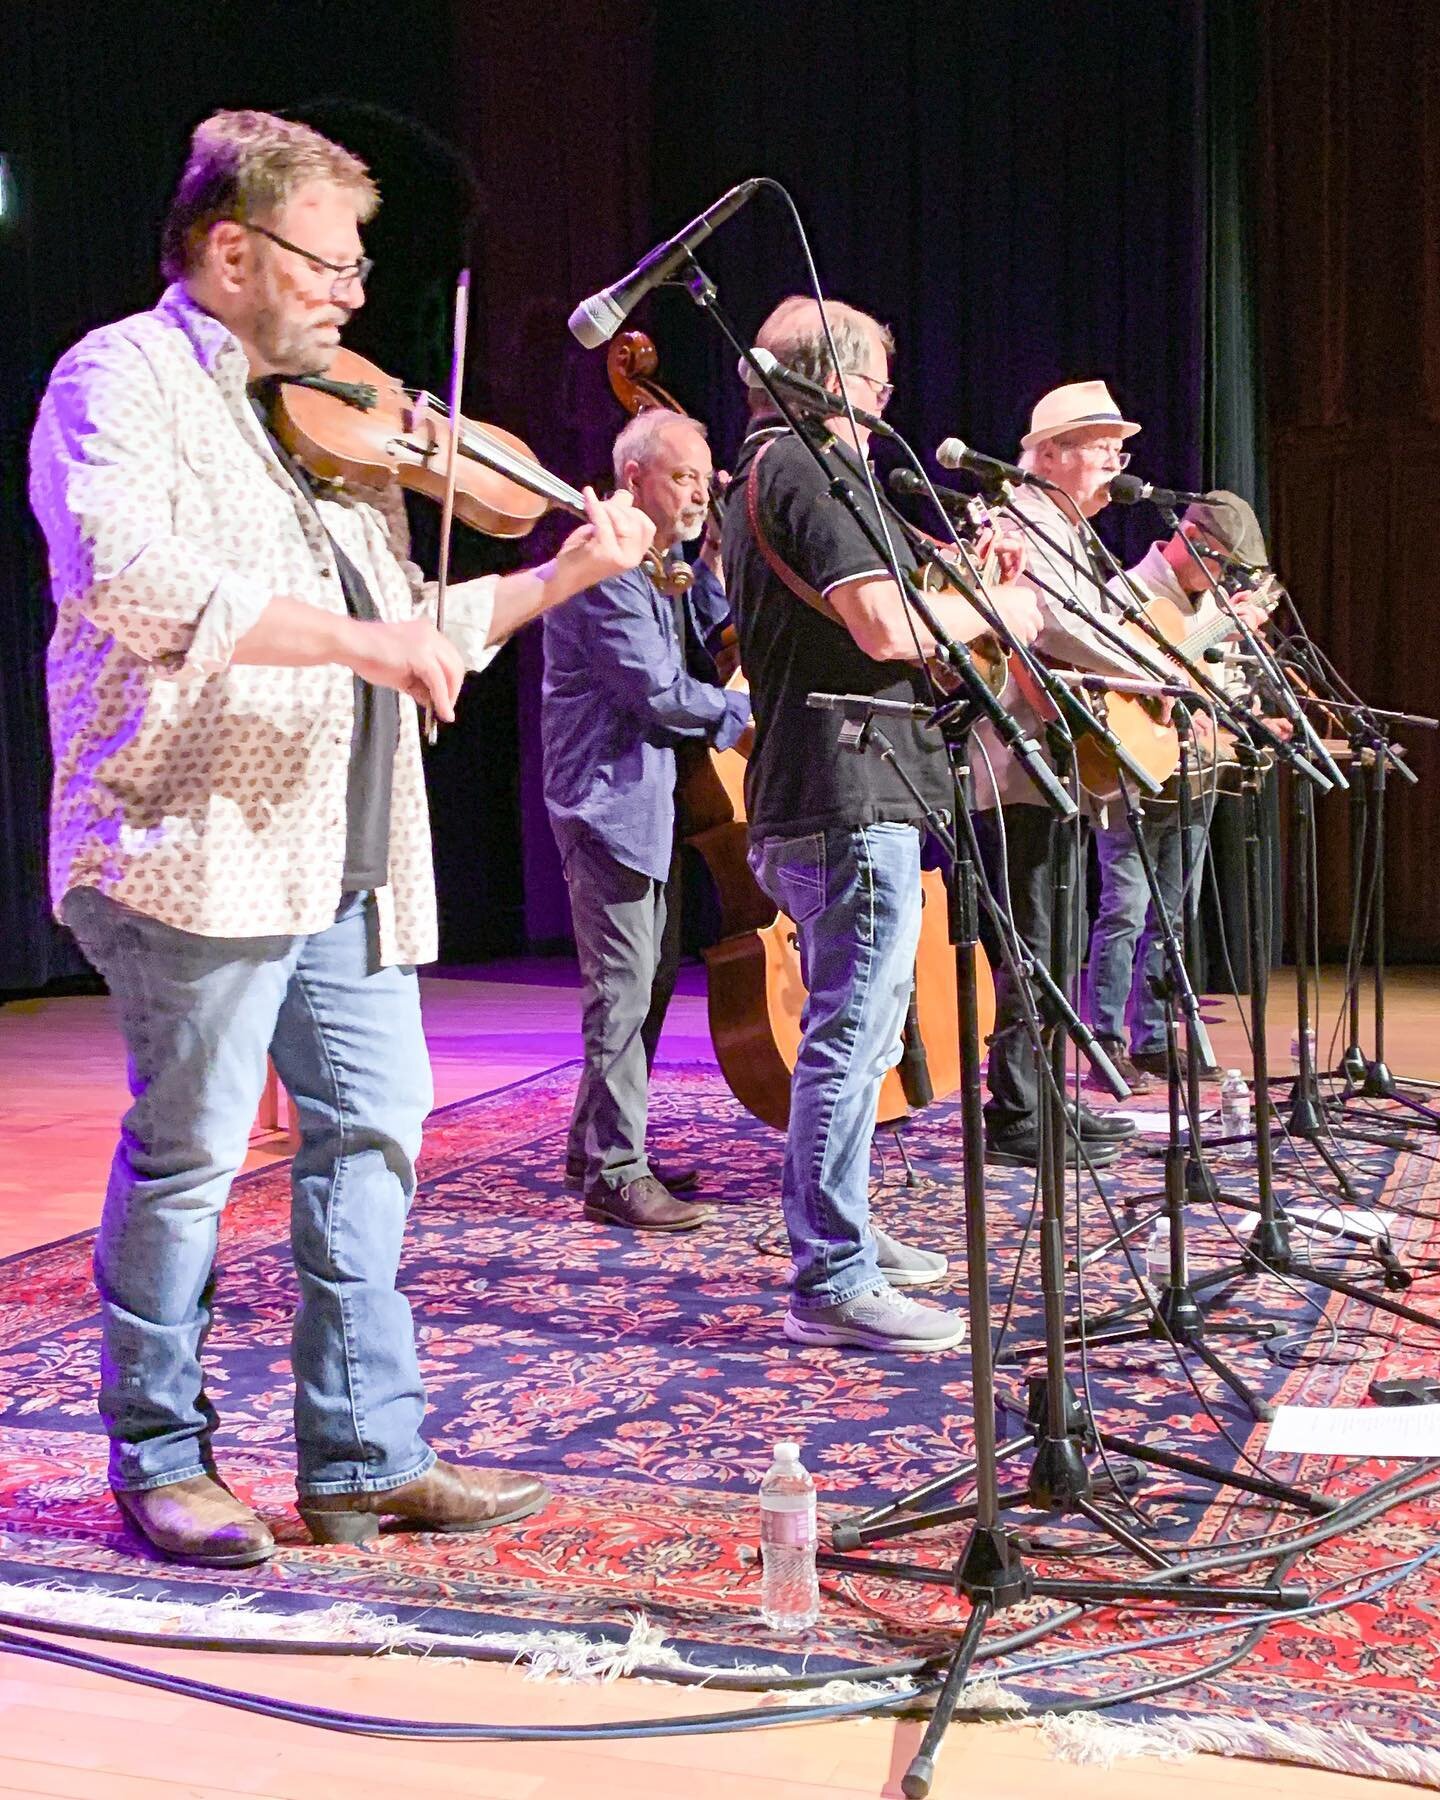 When Ron Stewart busts out the fiddle, you know it&rsquo;s going to be 🔥 

4.28 / Chicago, IL @oldtownschool